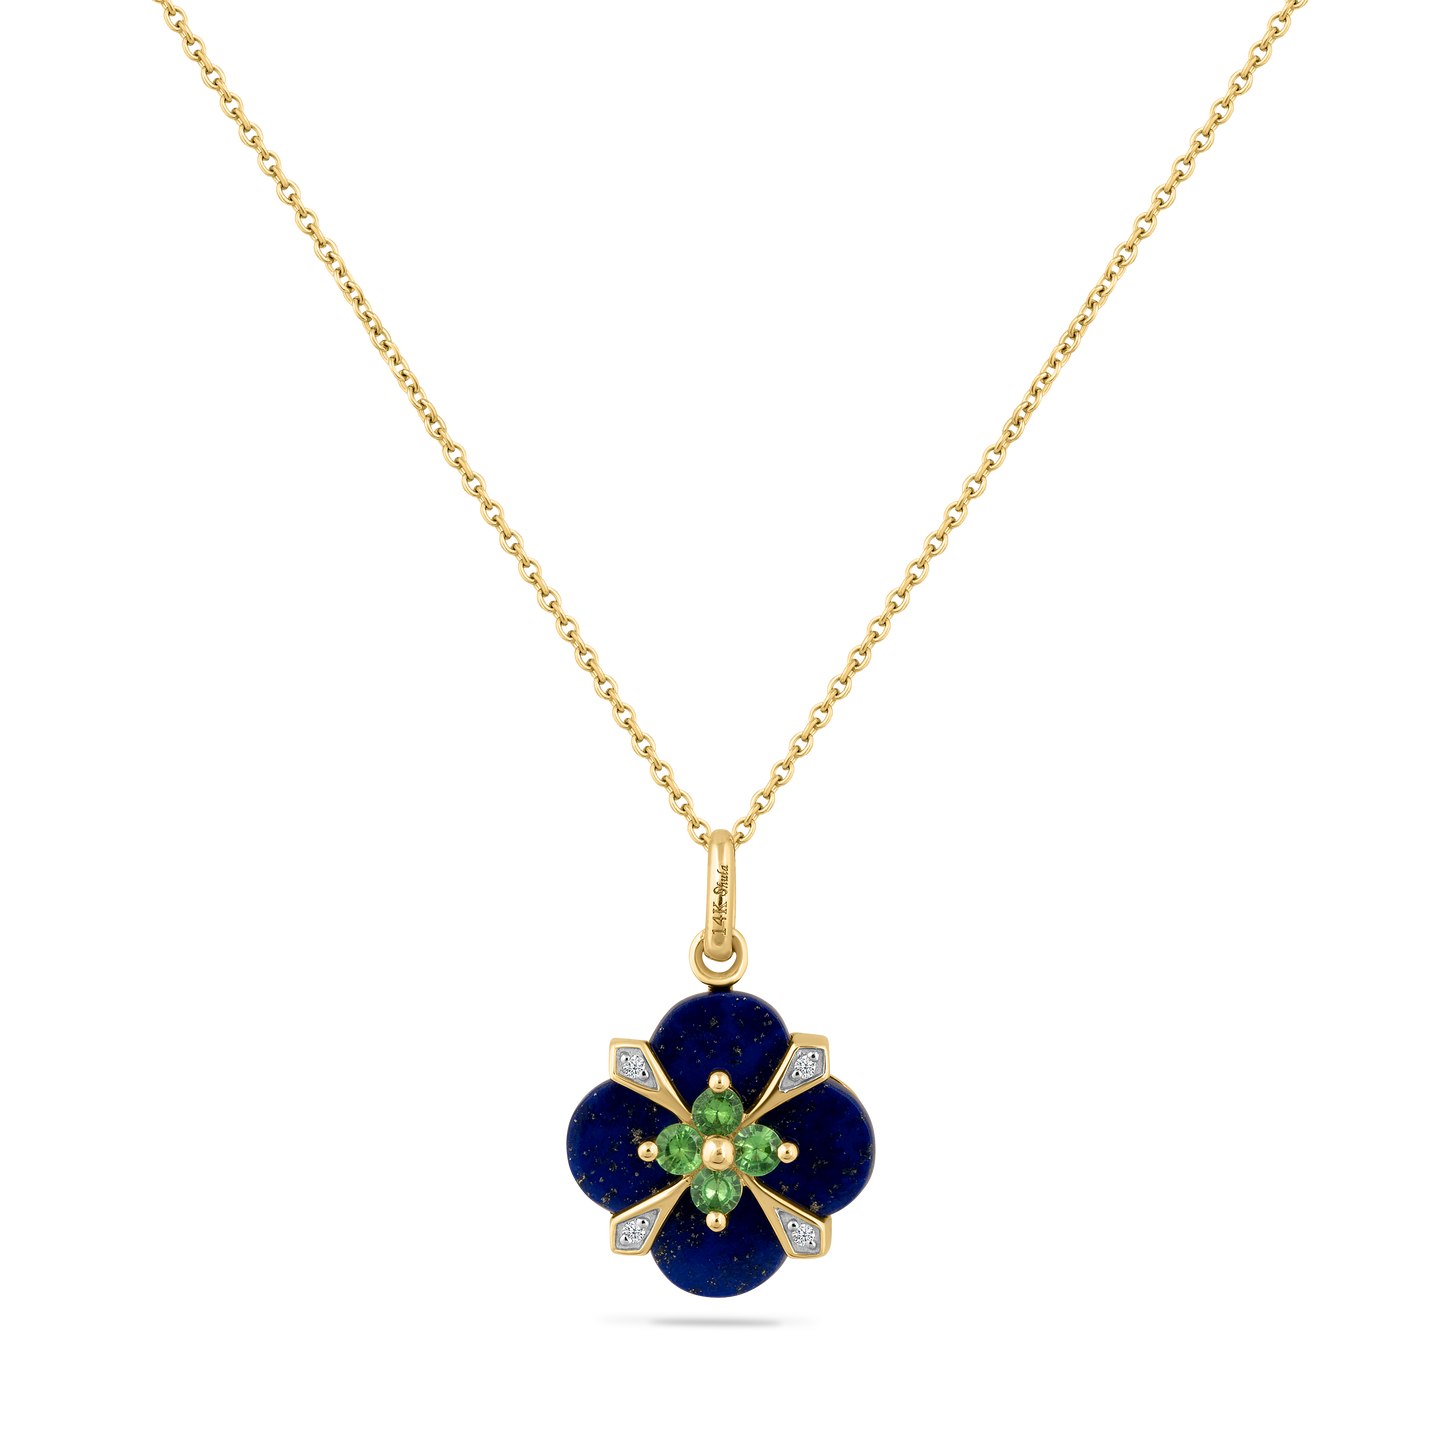 14K NECKLACE  WITH 4 DIAMONDS 0.0165CT, 4 TSAVORITE 0.18CT, 1 LAPIS PENDANT ON 18 INCHES CHAIN